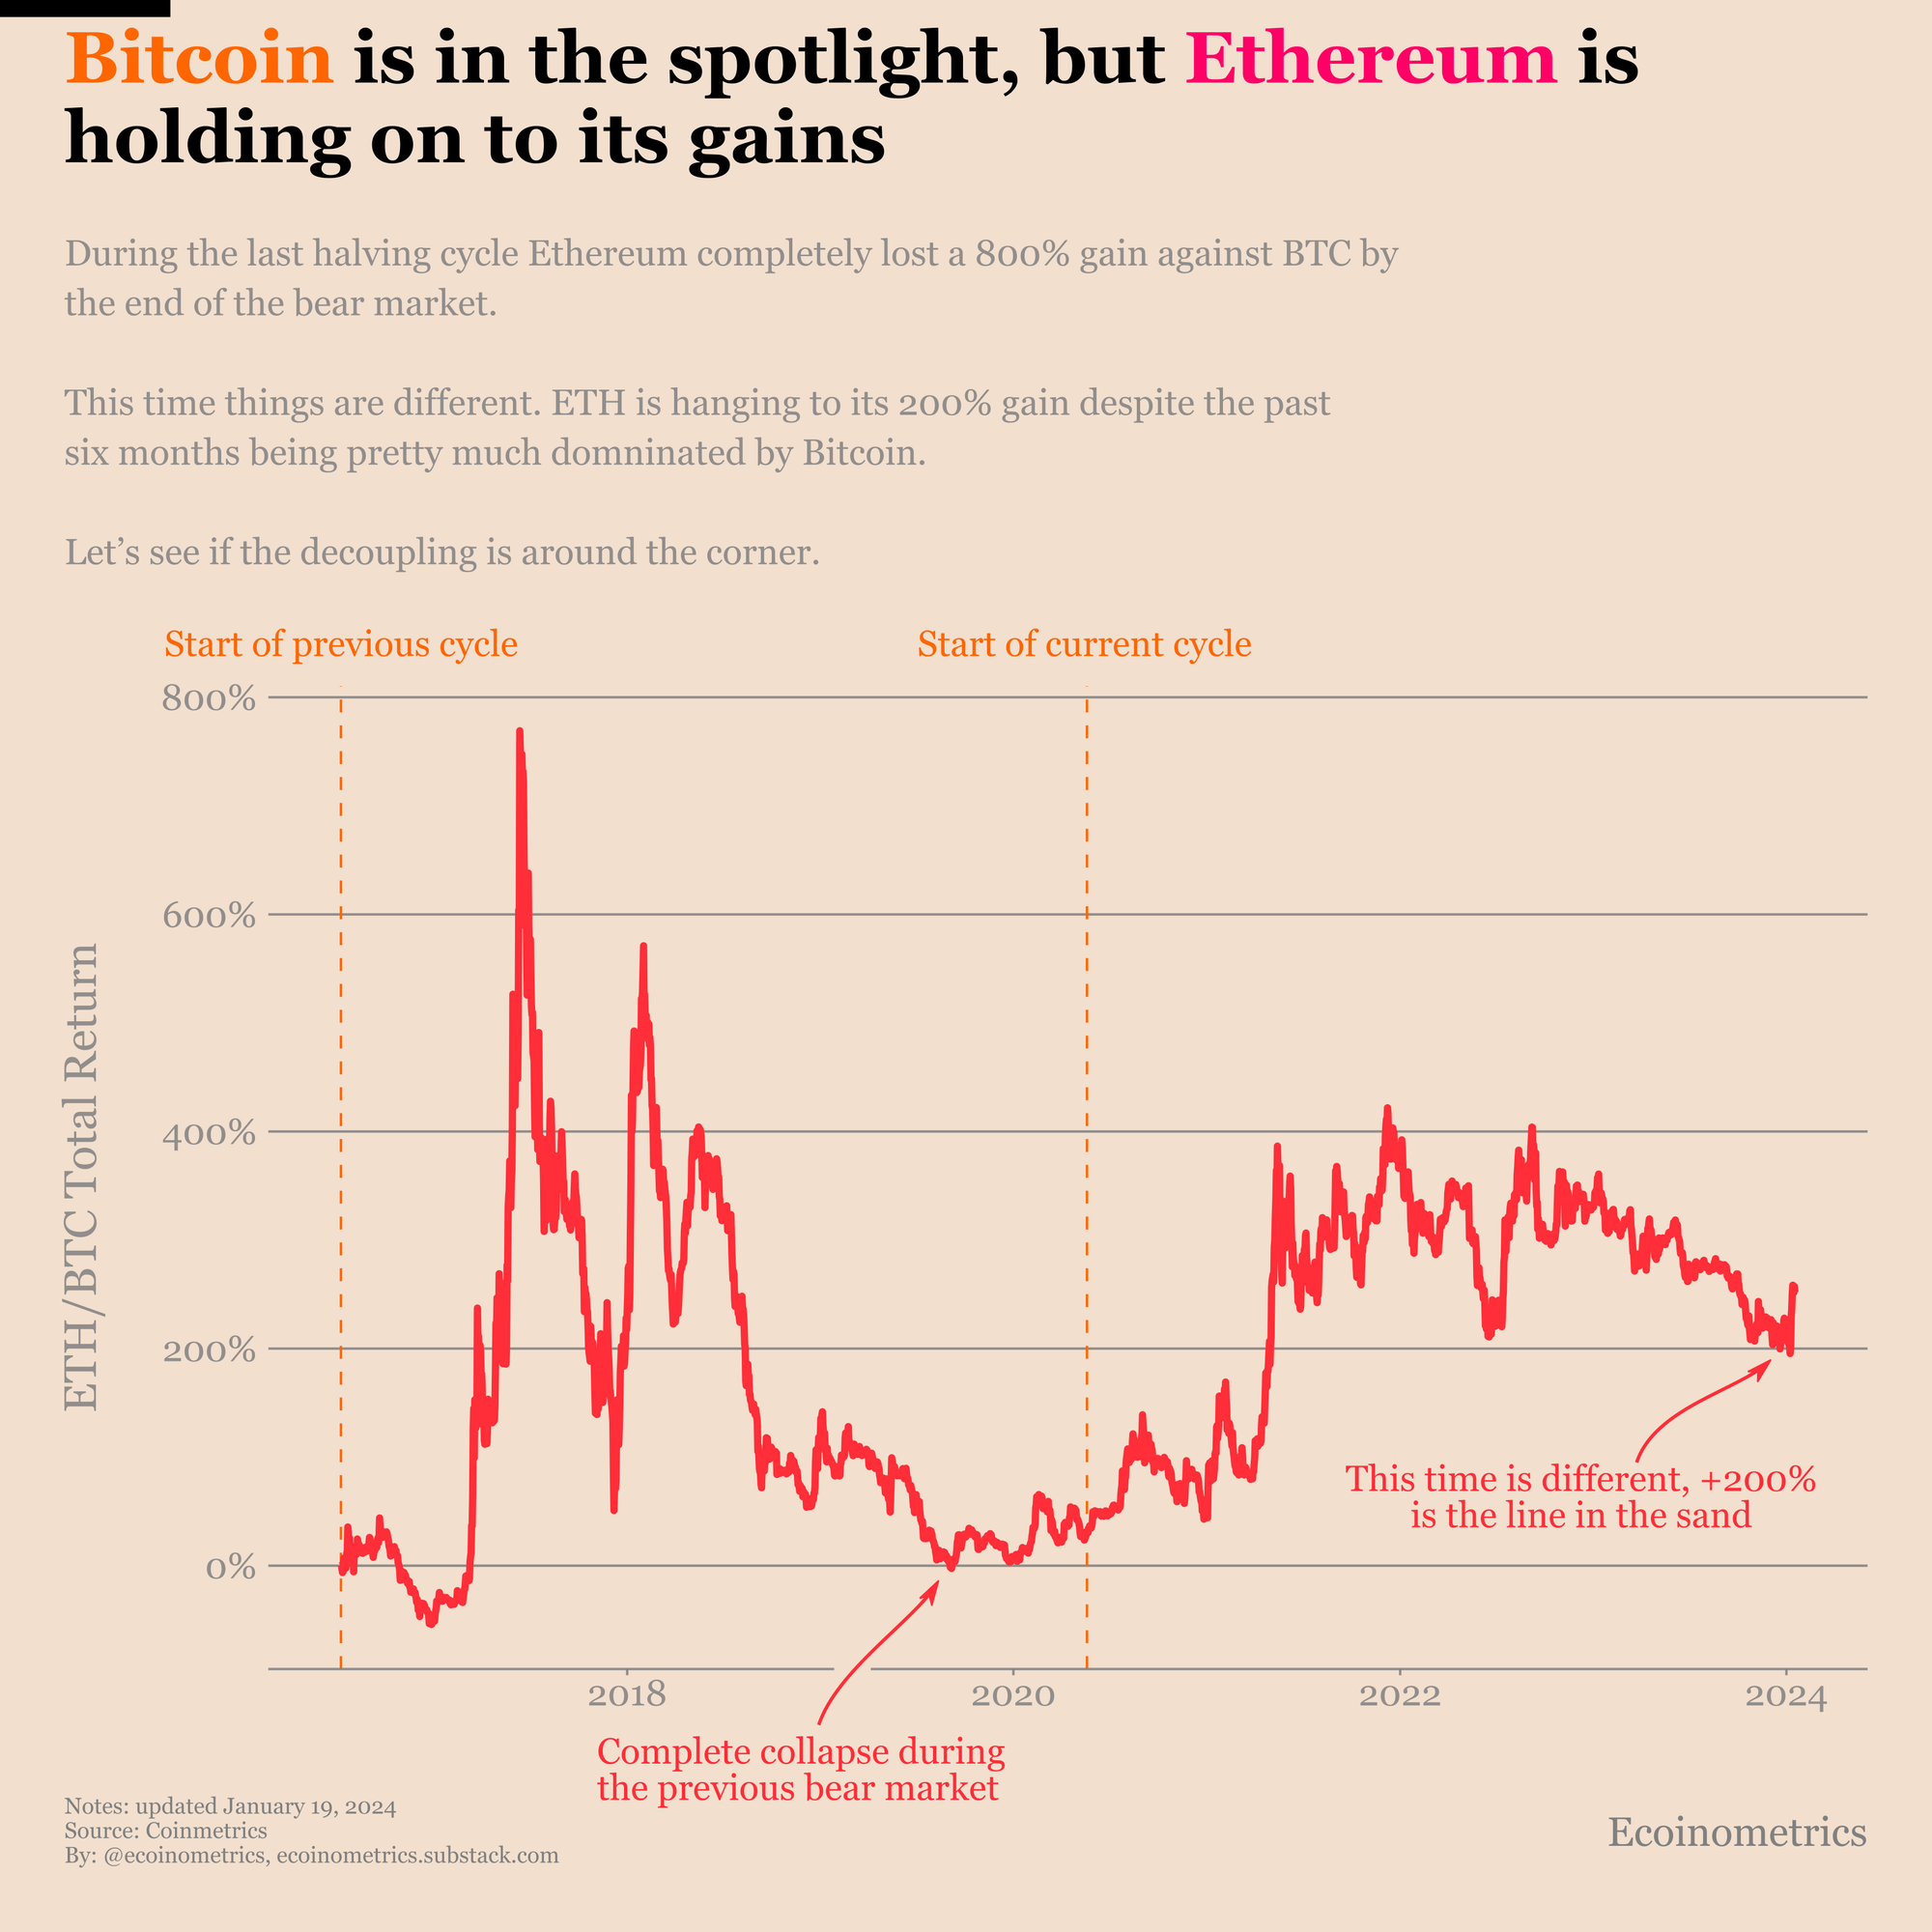 Evolution of ETH/BTC over the past two Bitcoin halving cycles.